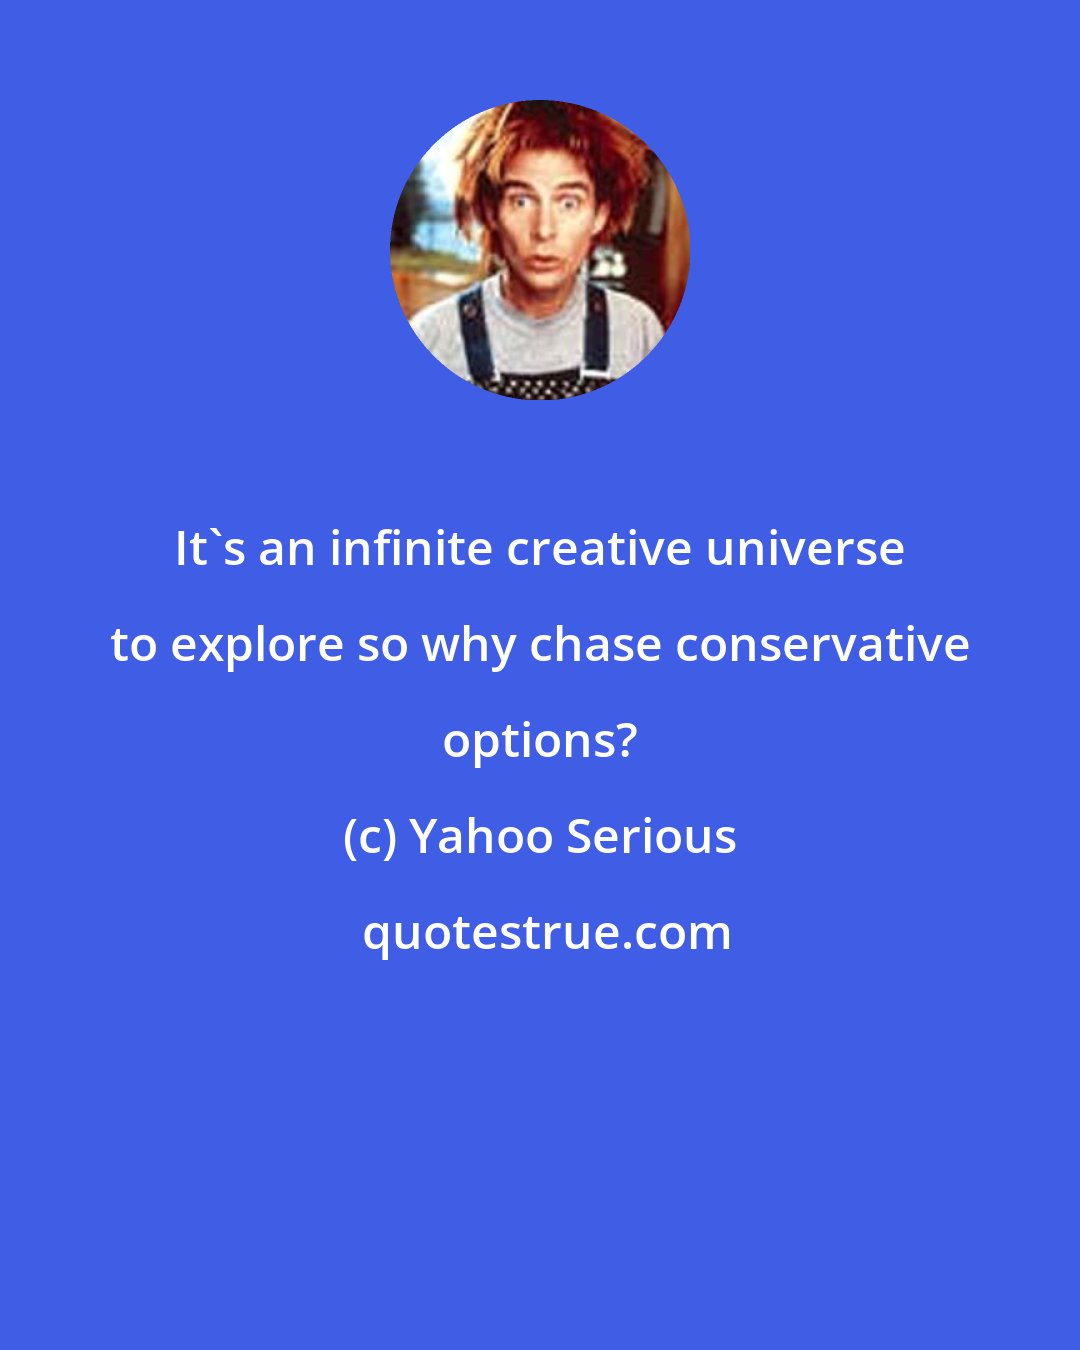 Yahoo Serious: It's an infinite creative universe to explore so why chase conservative options?